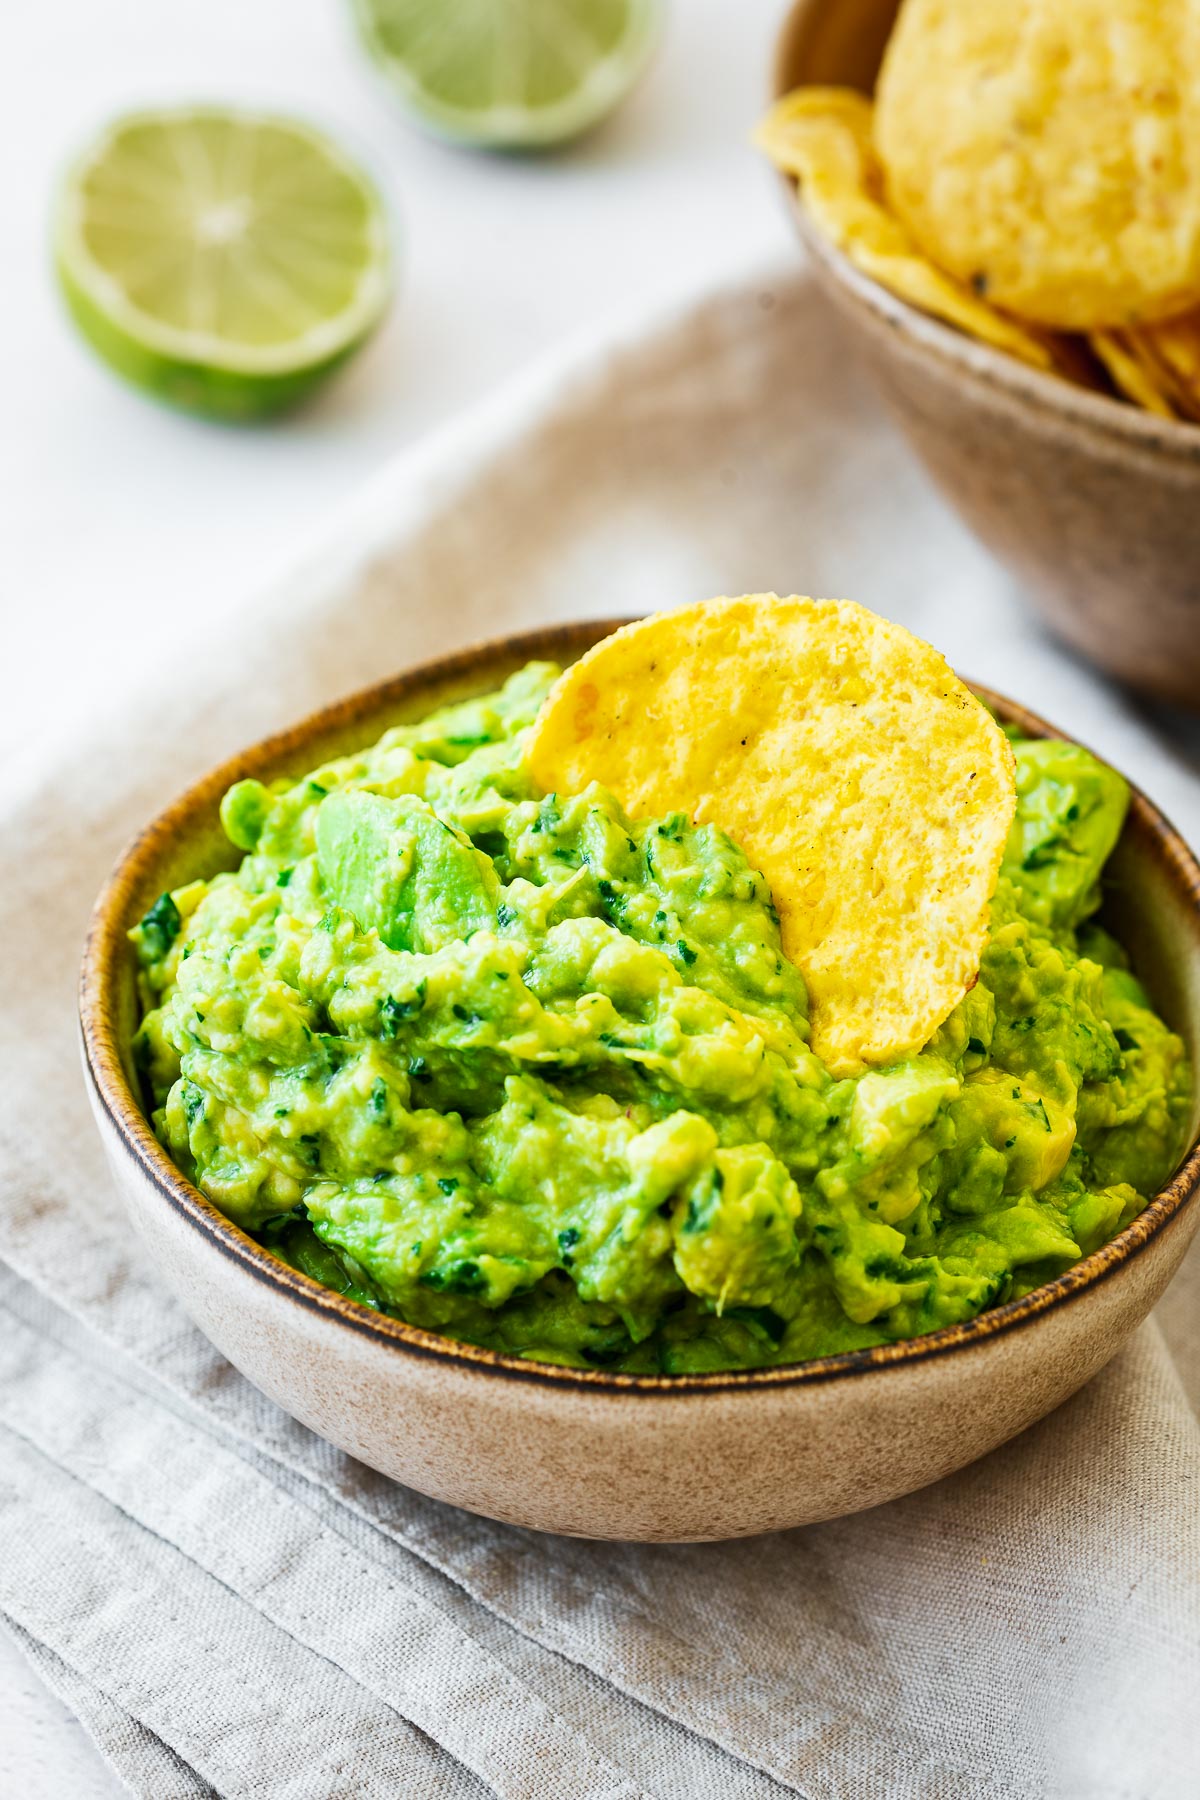 Easy Guacamole Without Onion or Tomato